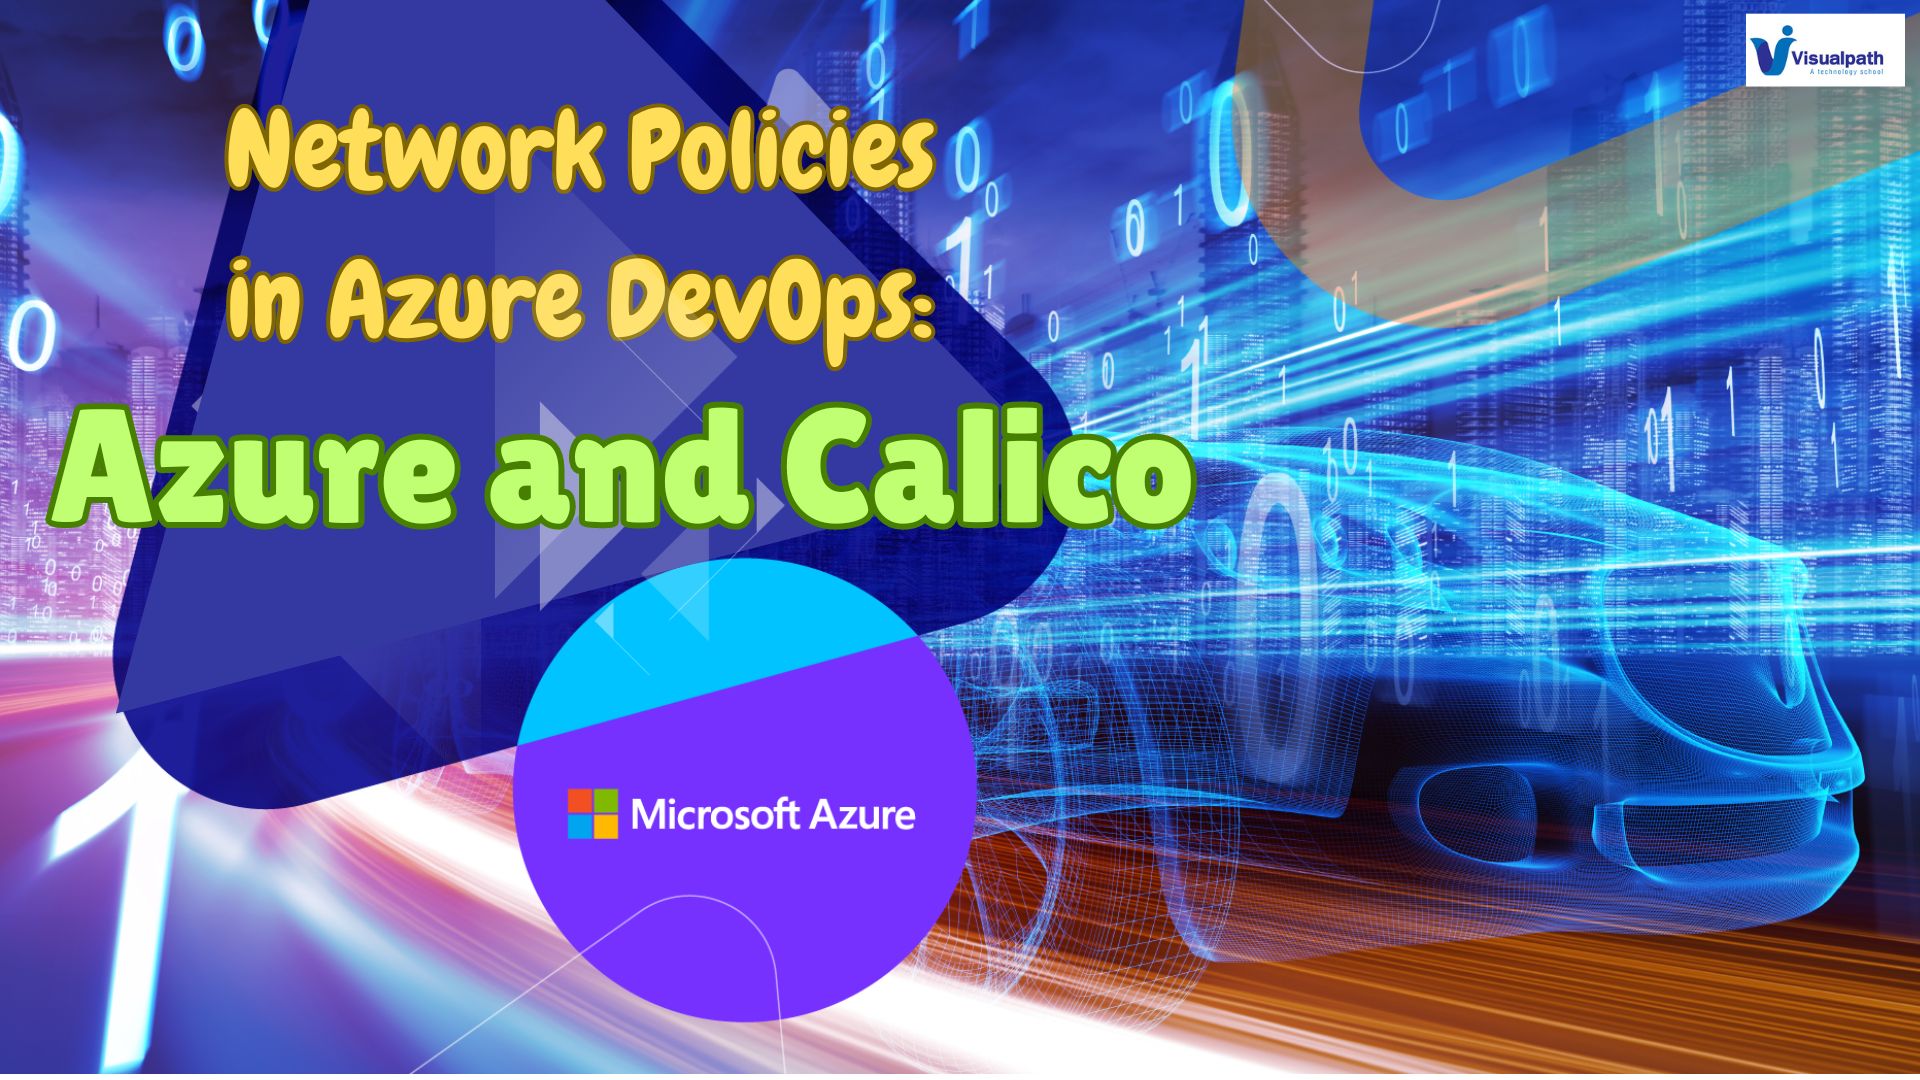 Network Policies in Azure DevOps: Azure and Calico